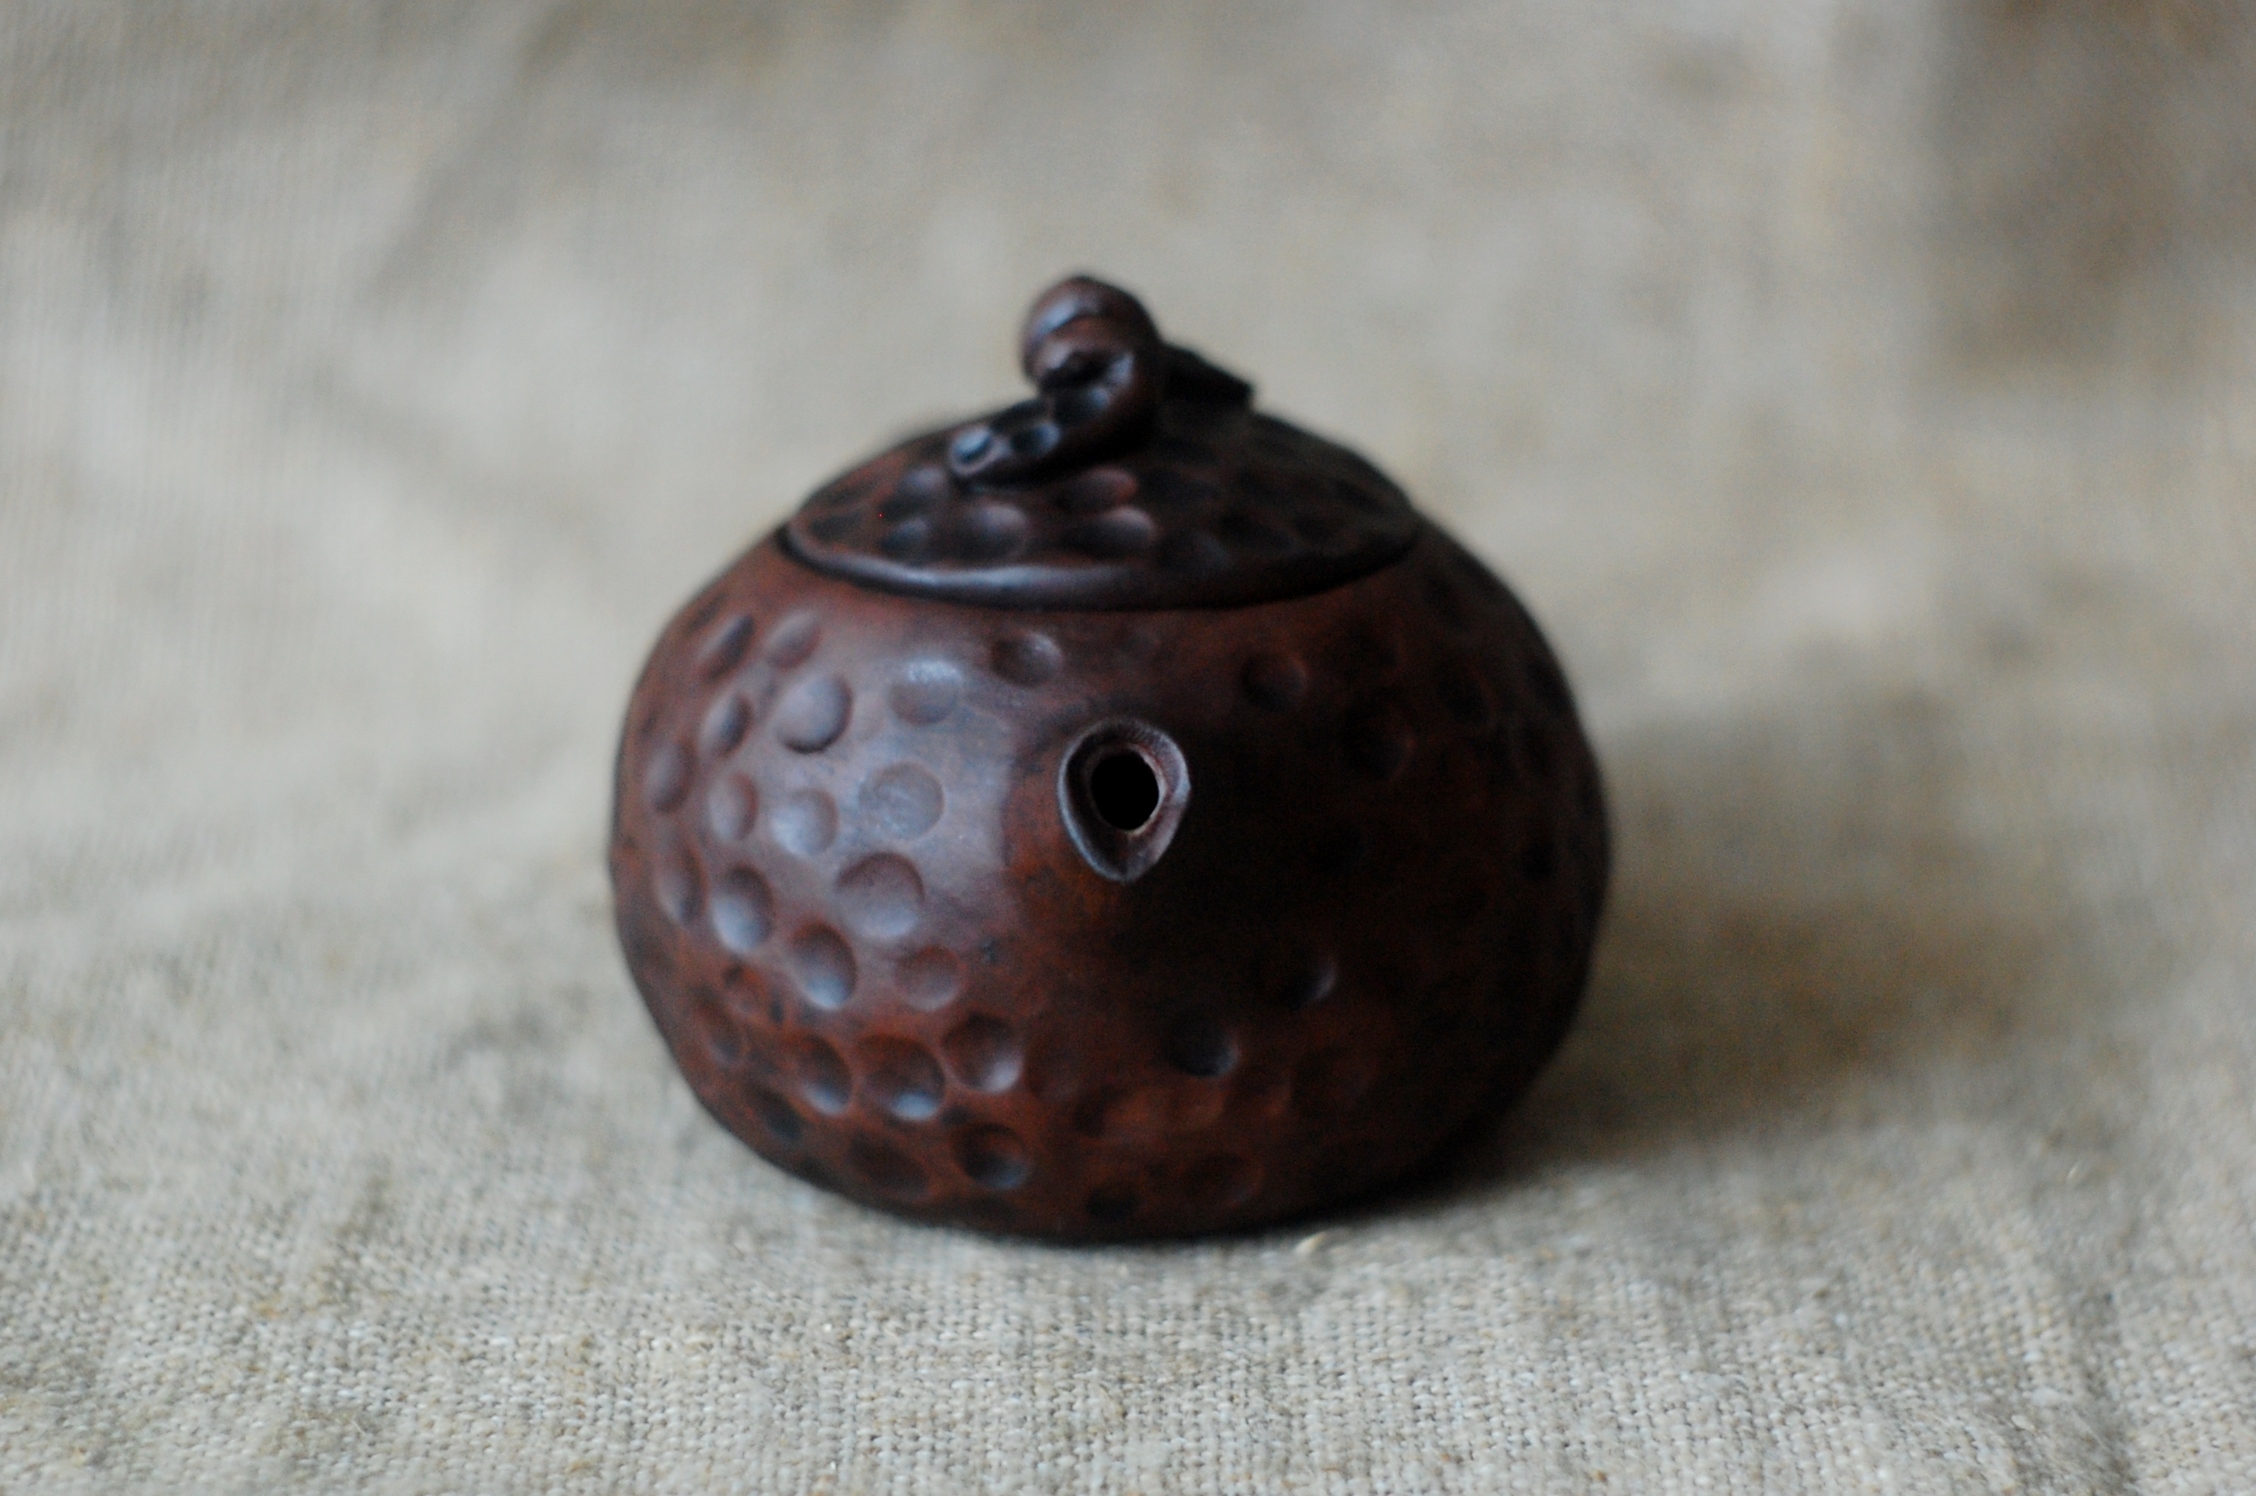 Bug pottery clay tea brewing pot or teapot for tea ceremony